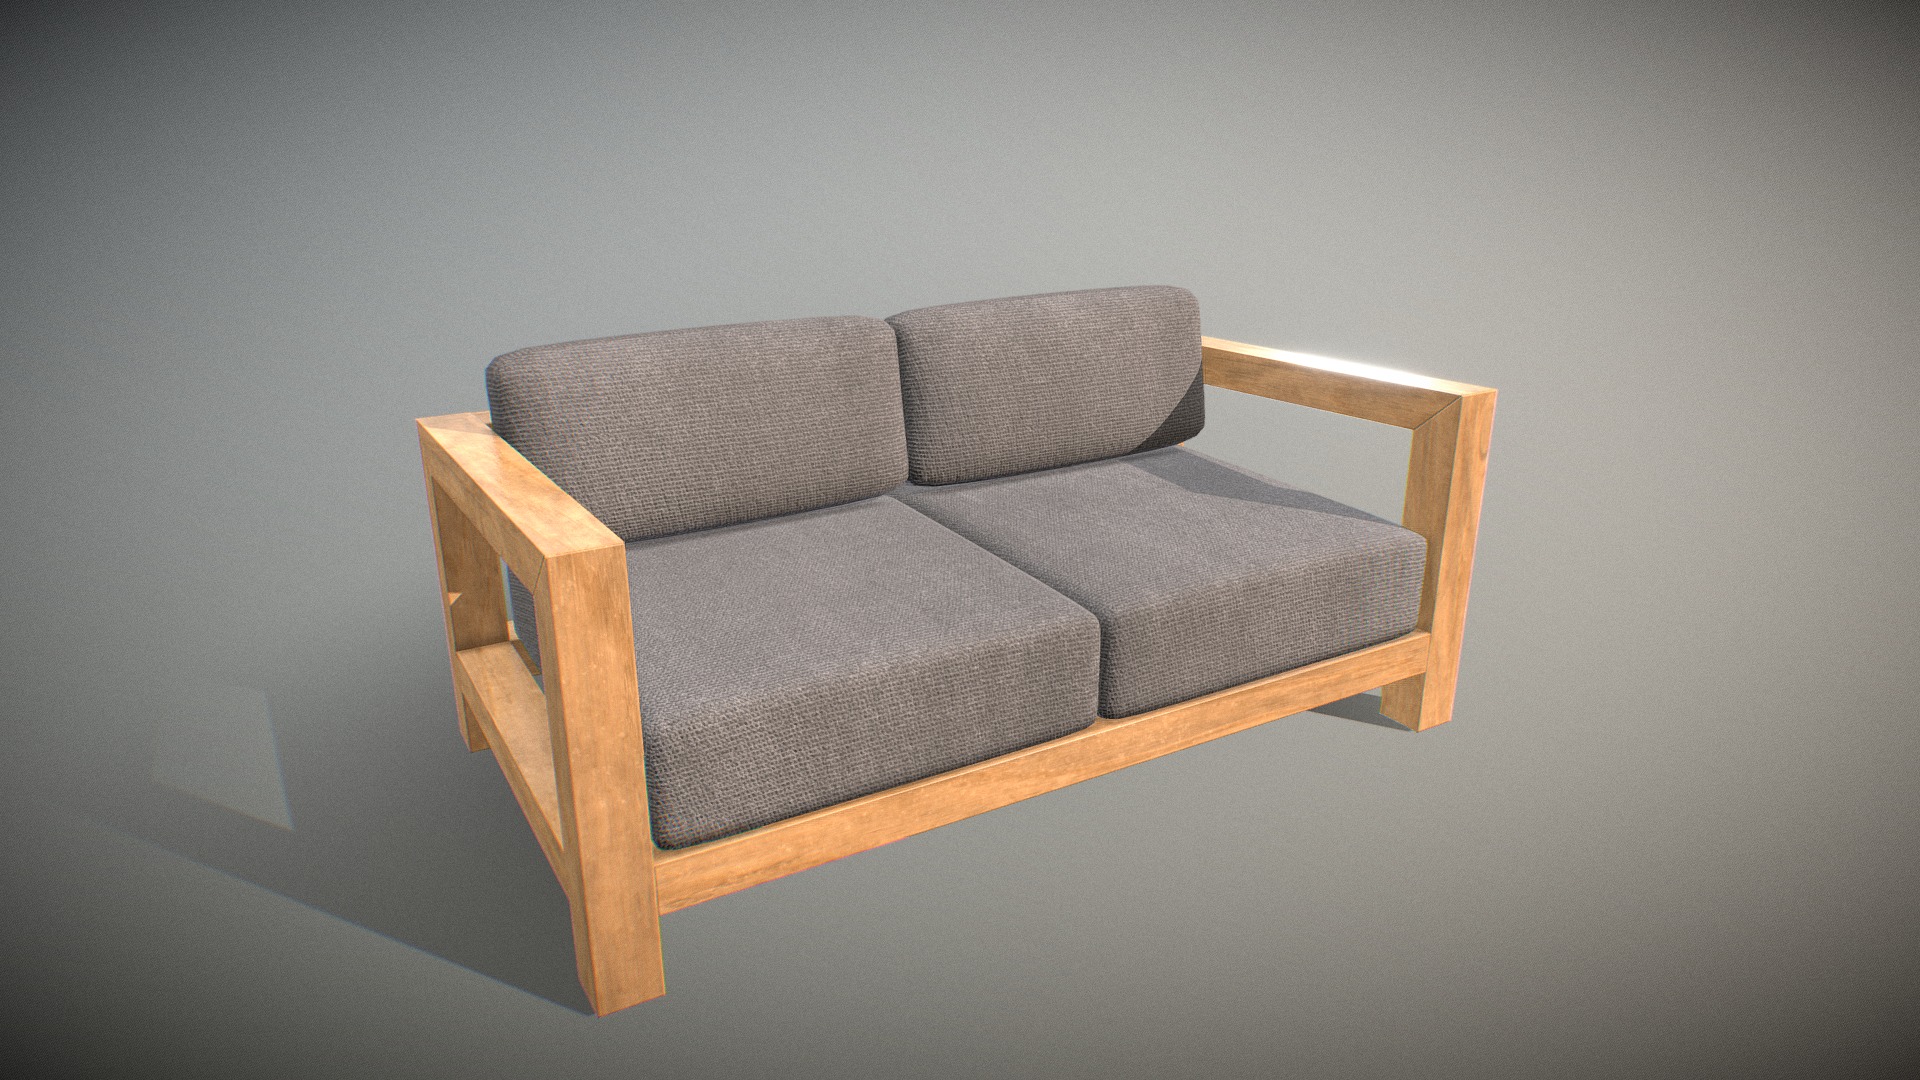 3D model Veroda Angle Sofa 05 - This is a 3D model of the Veroda Angle Sofa 05. The 3D model is about a couch with a wood frame.